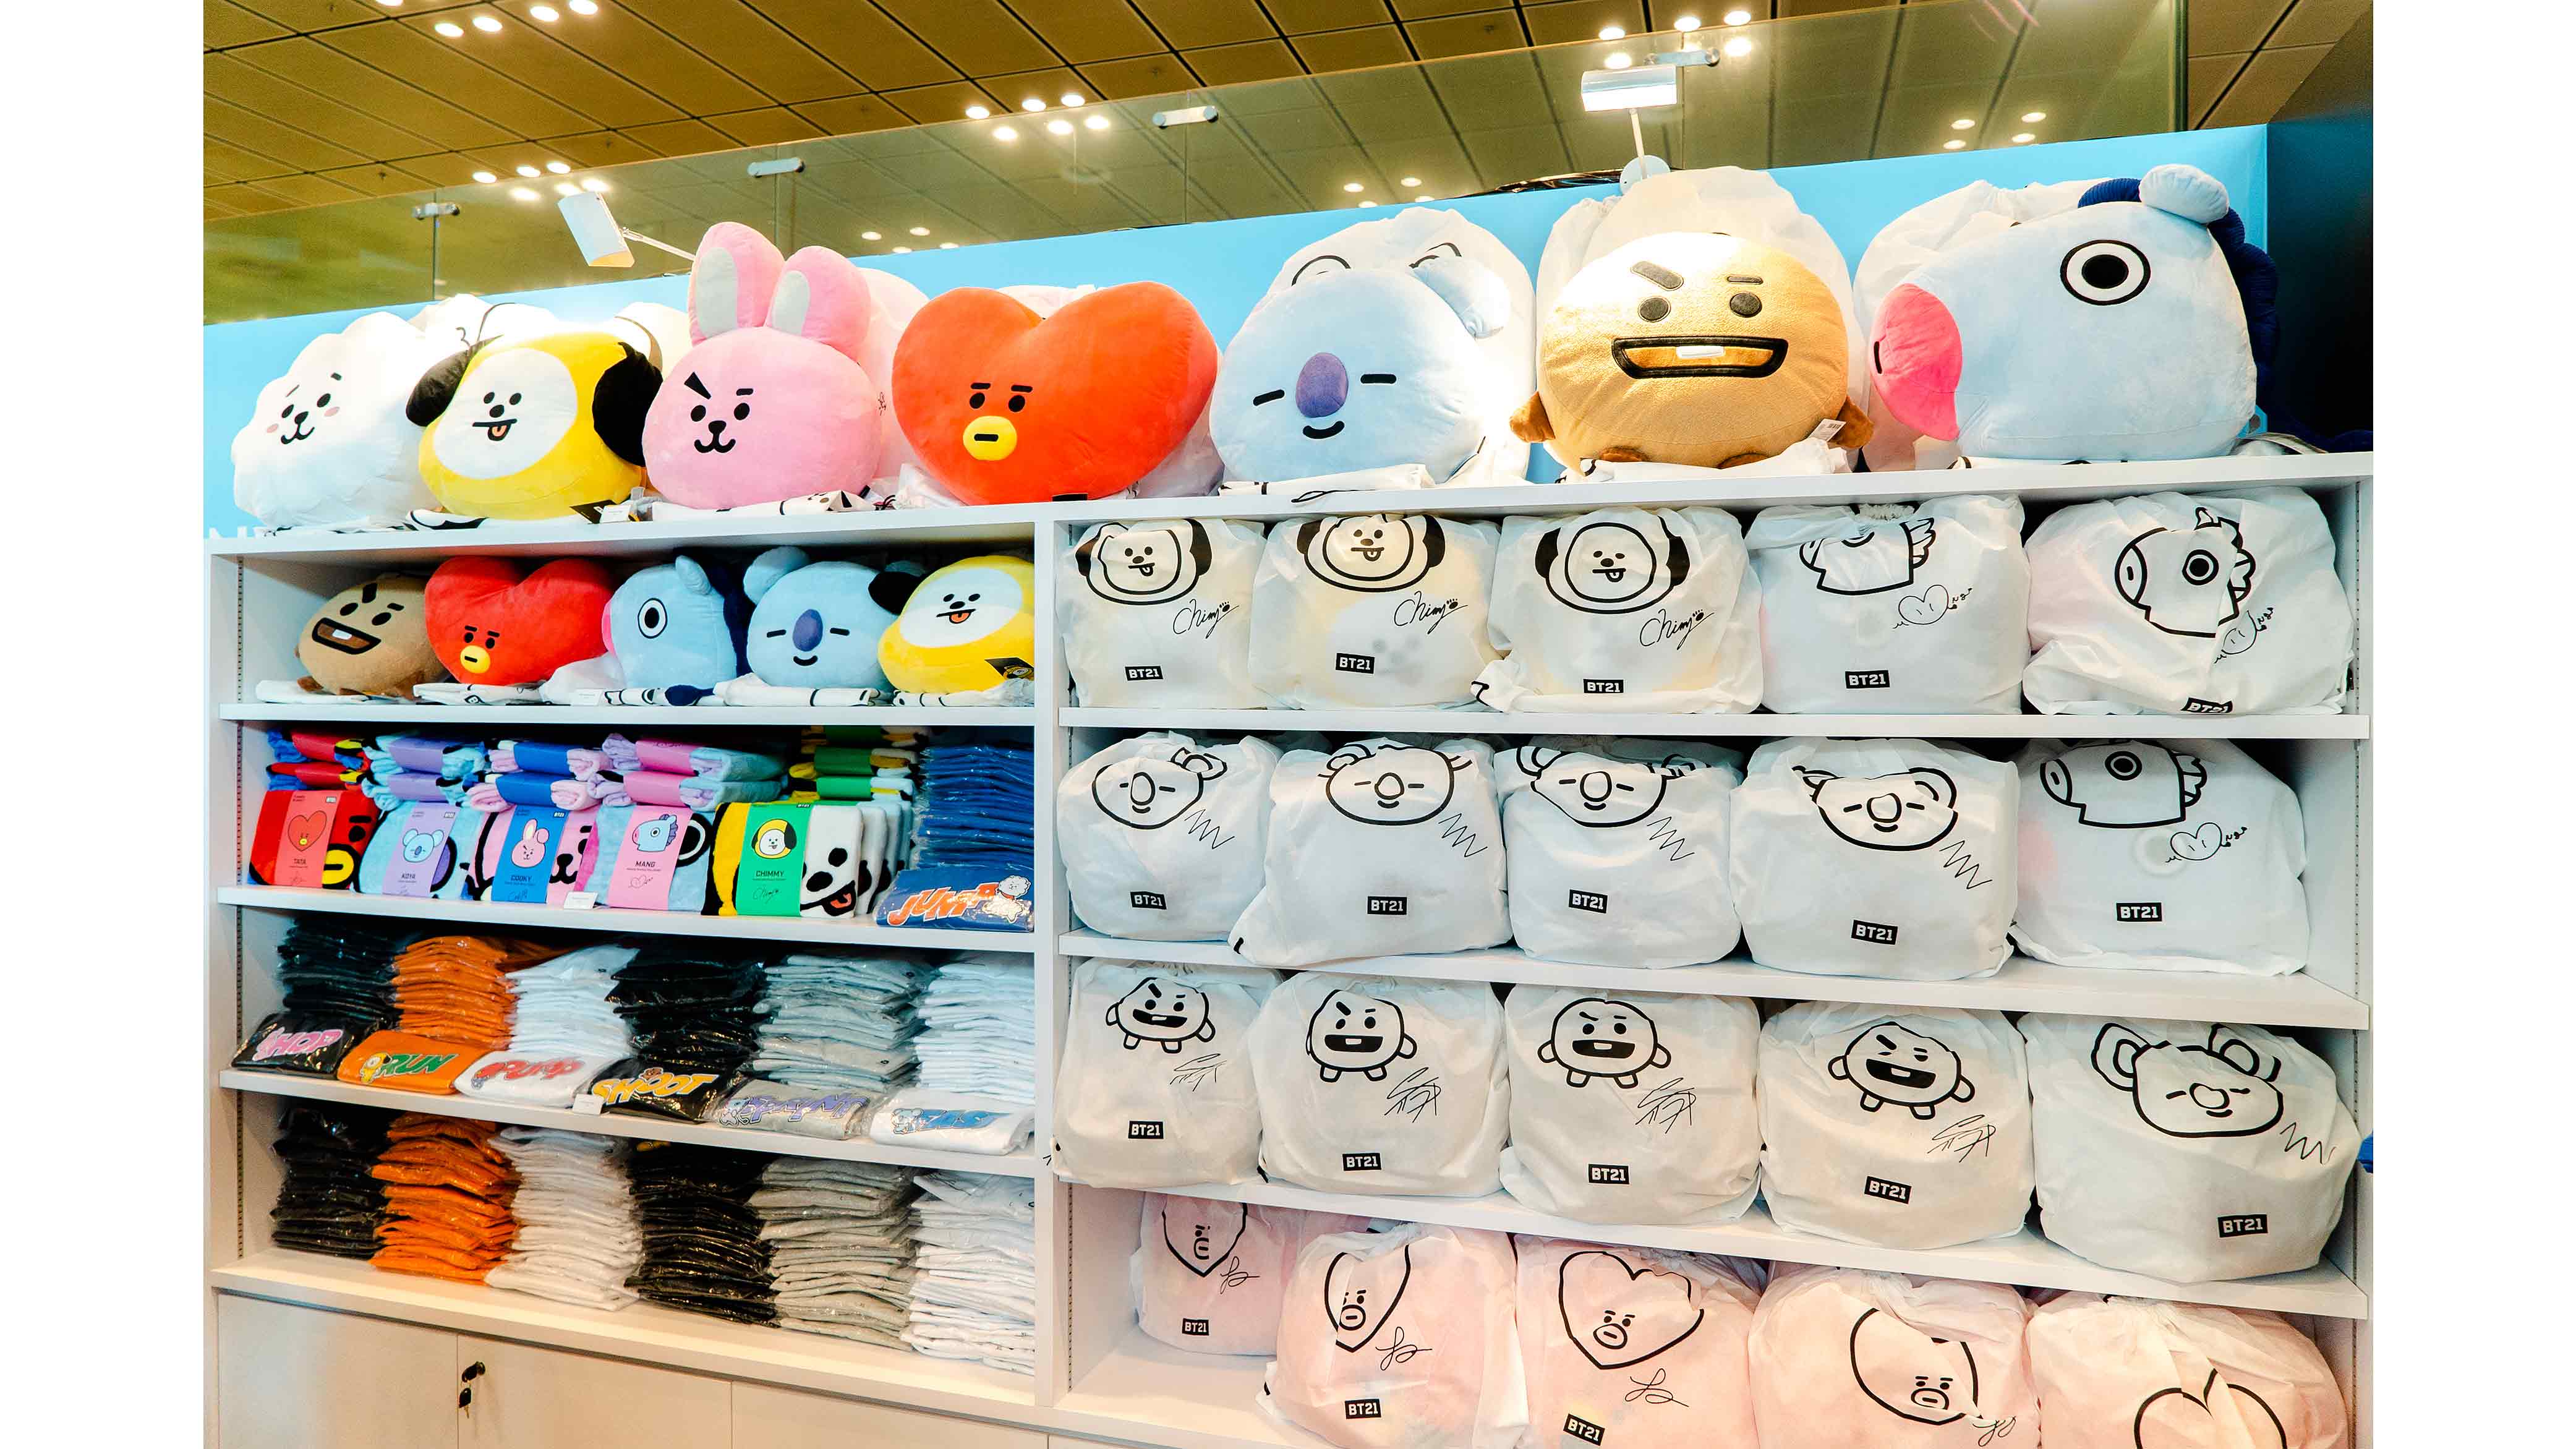 The BT21 & Line Friends Pop-Up at Changi Airport’s T3 Has The Cutest ...